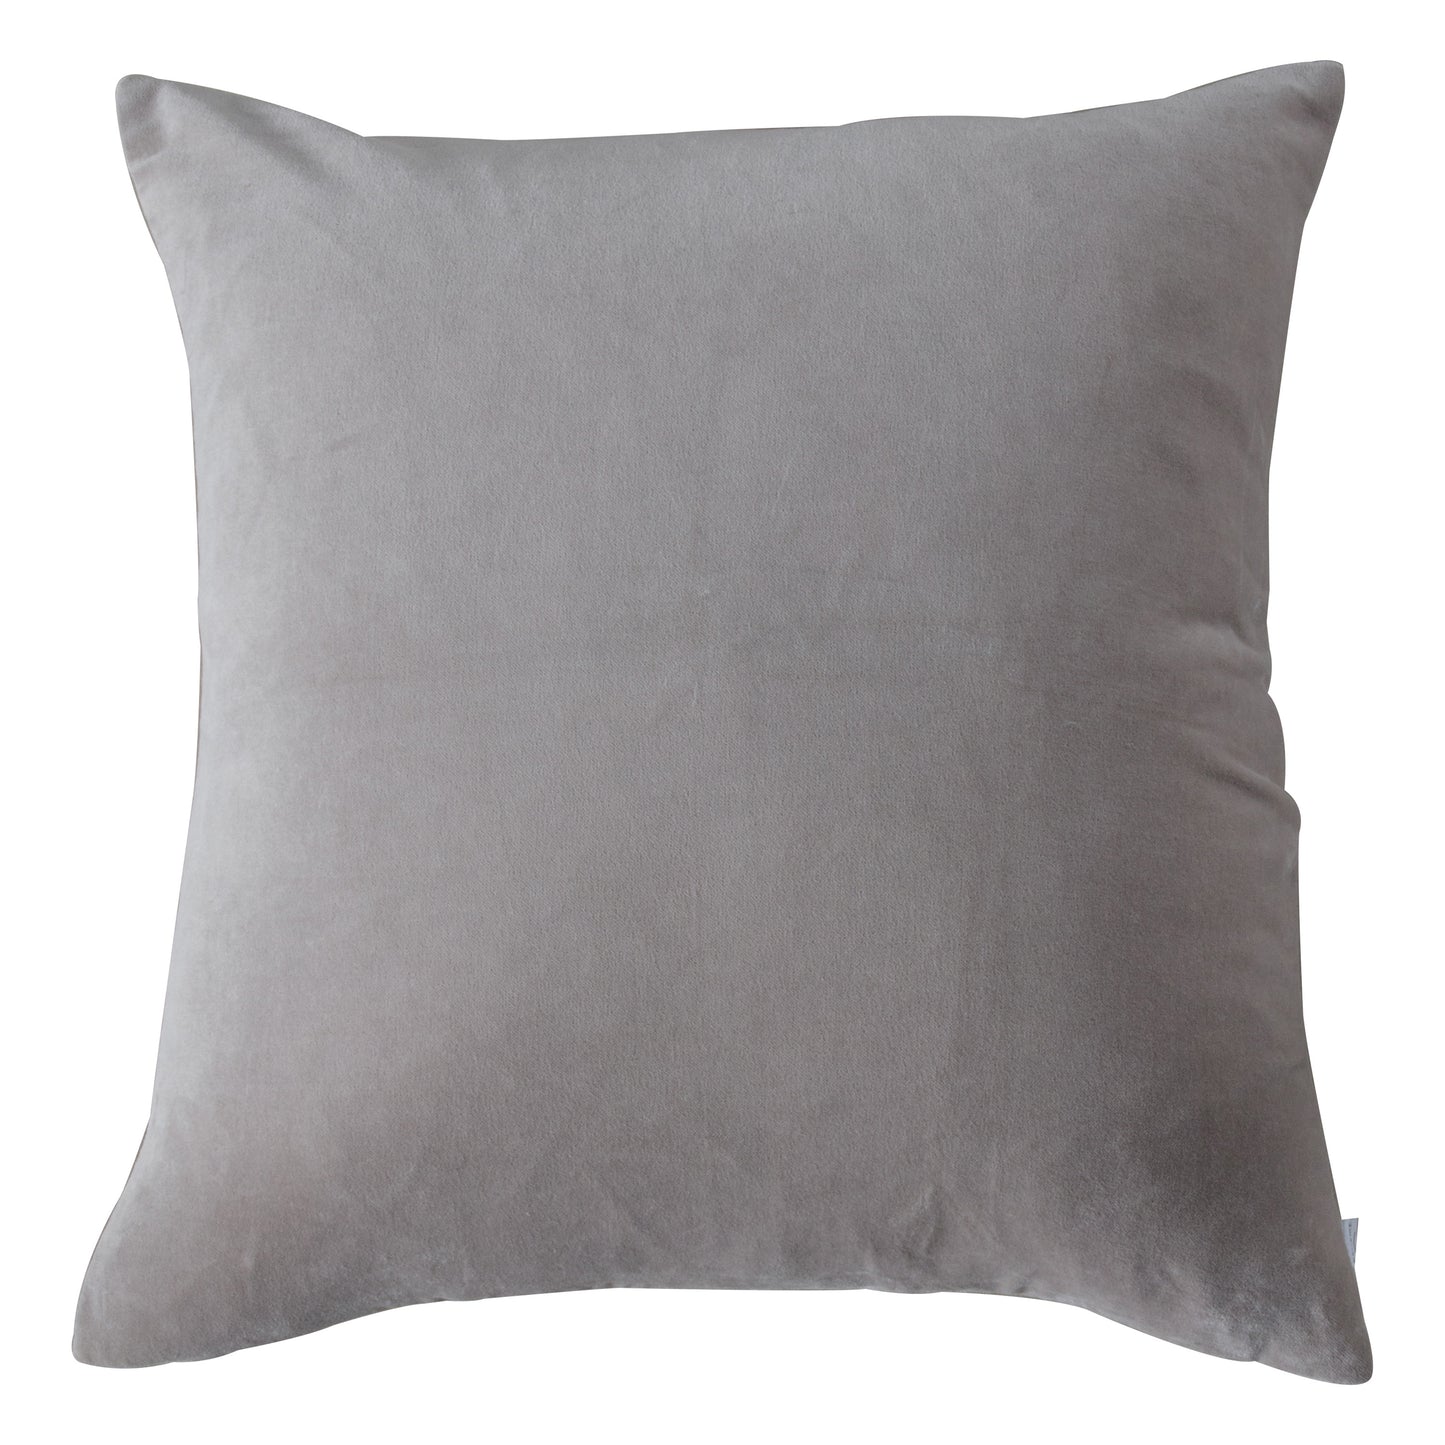 A Cotton Velvet Cushion Grey 500x500mm from Kikiathome.co.uk, perfect for home furniture and interior decor, showcased on a white background.